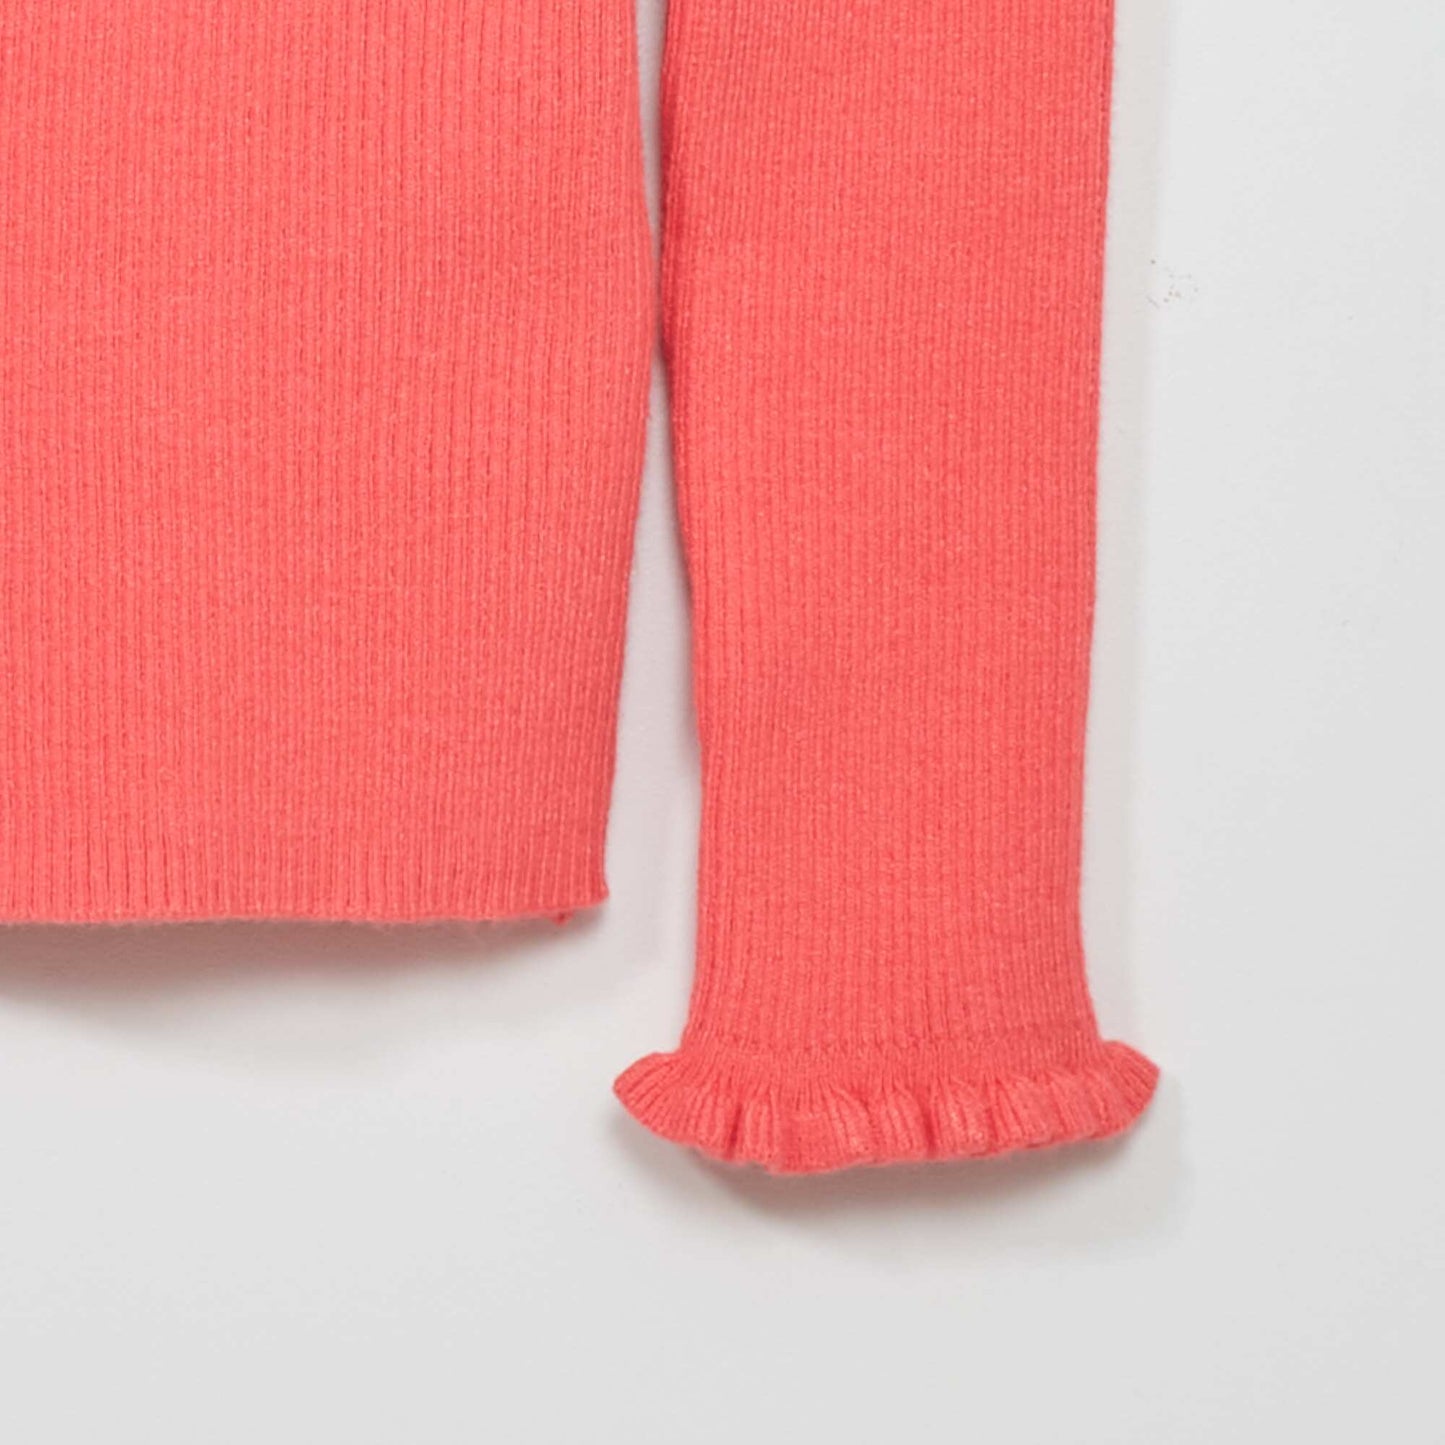 Ribbed knit sweater Pink